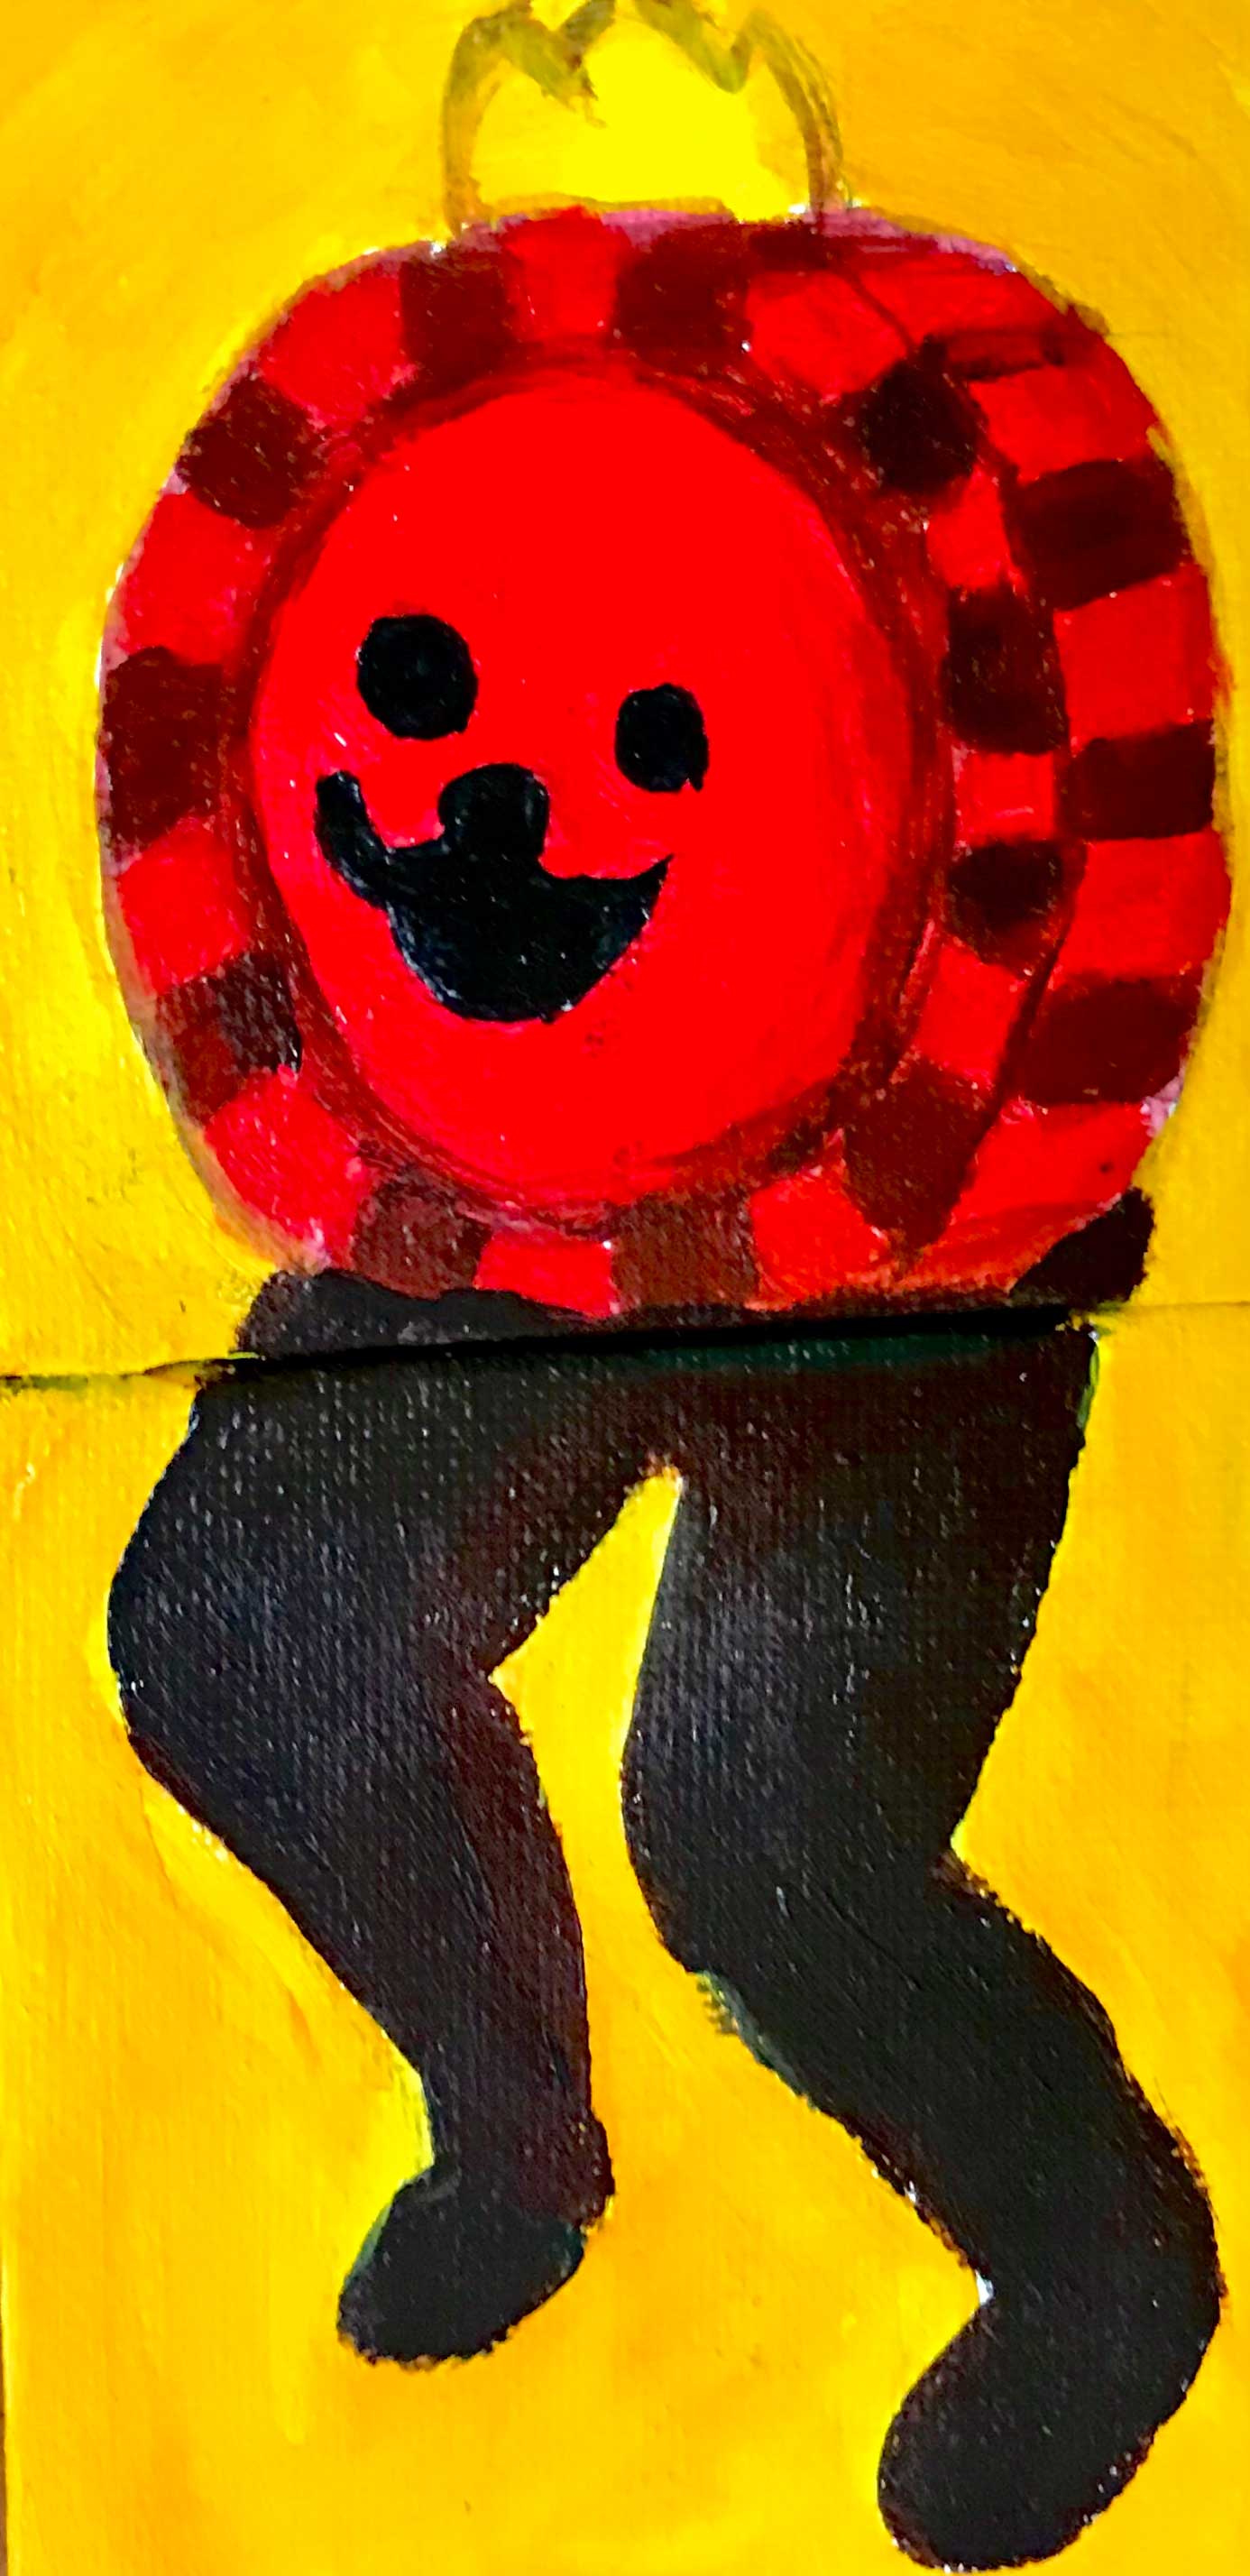 Mini painting of a checker piece with legs... yeah.